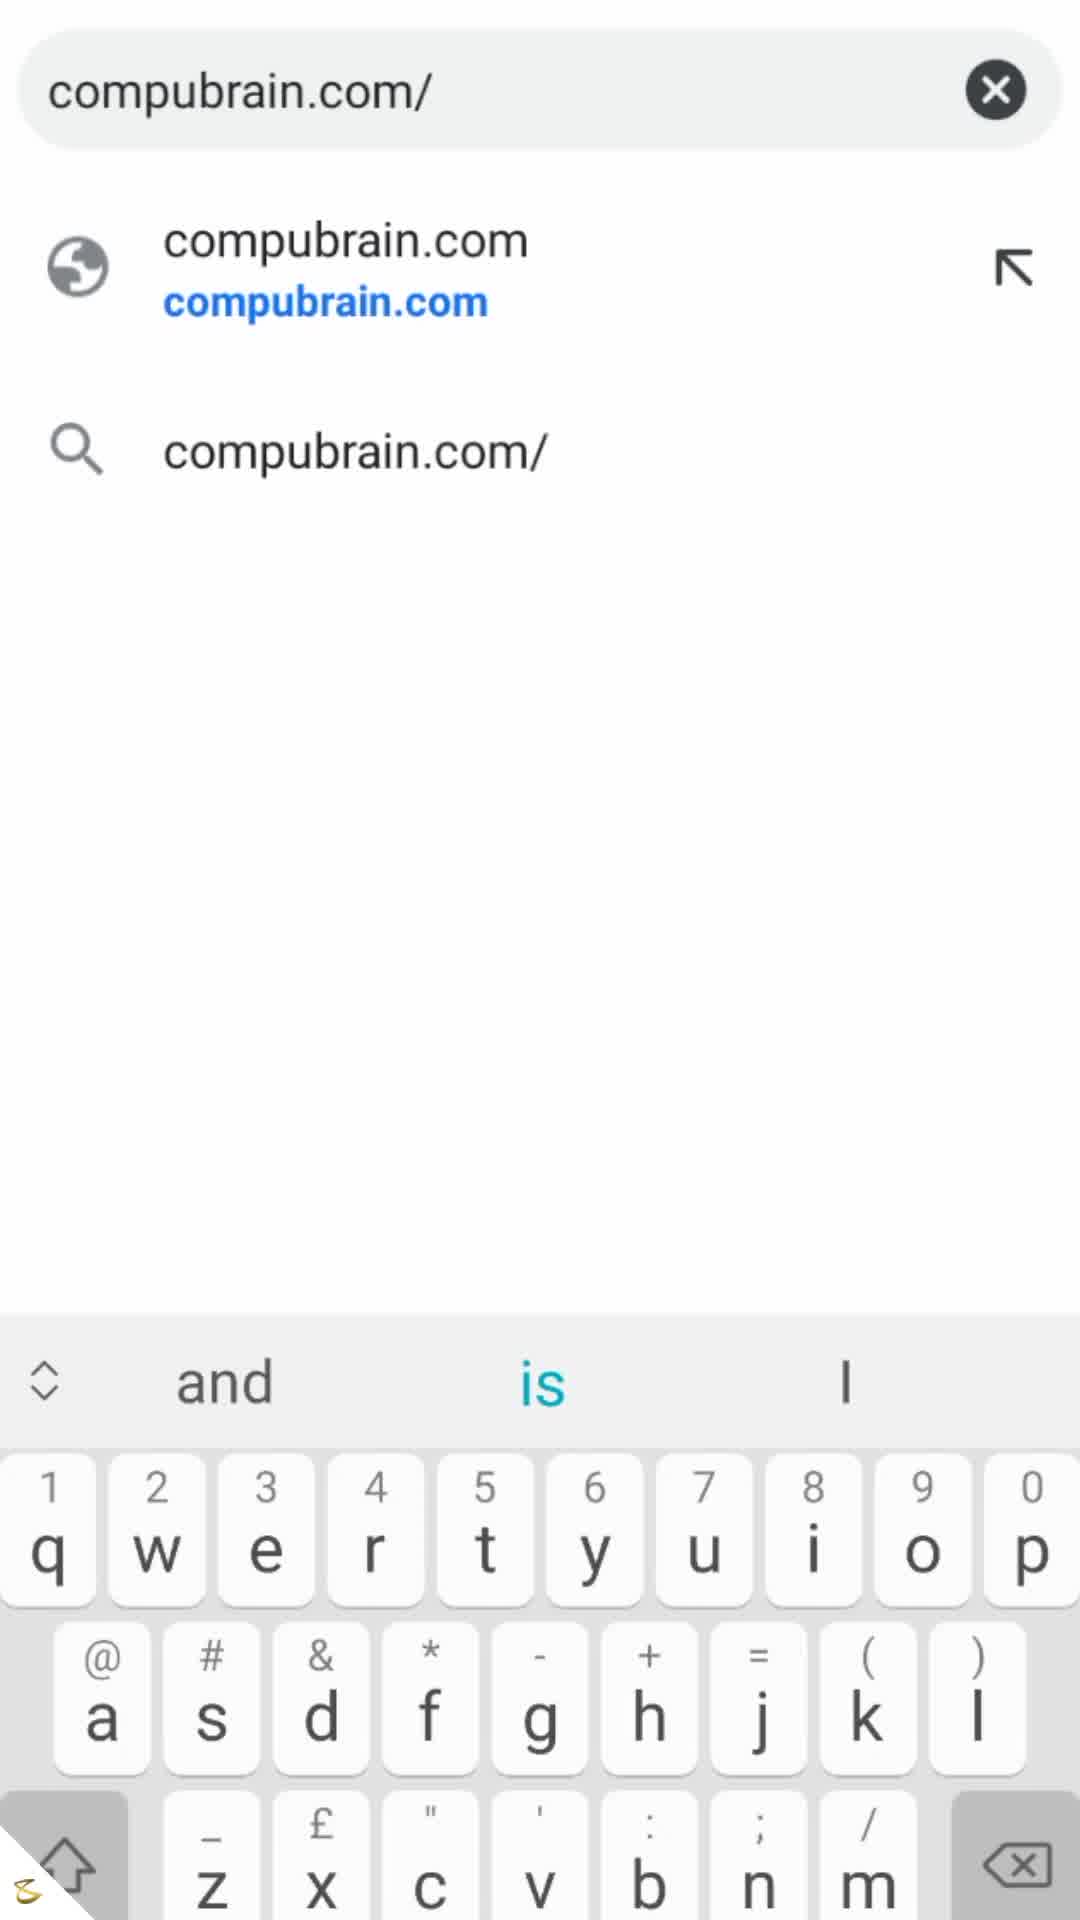 Do You Know How many webpages/Documents does your favorite website have?
Check this cool tool by CompuBrain and instantly count the number of pages your website has!

#CompuBrain #Business #Technology #Innovation